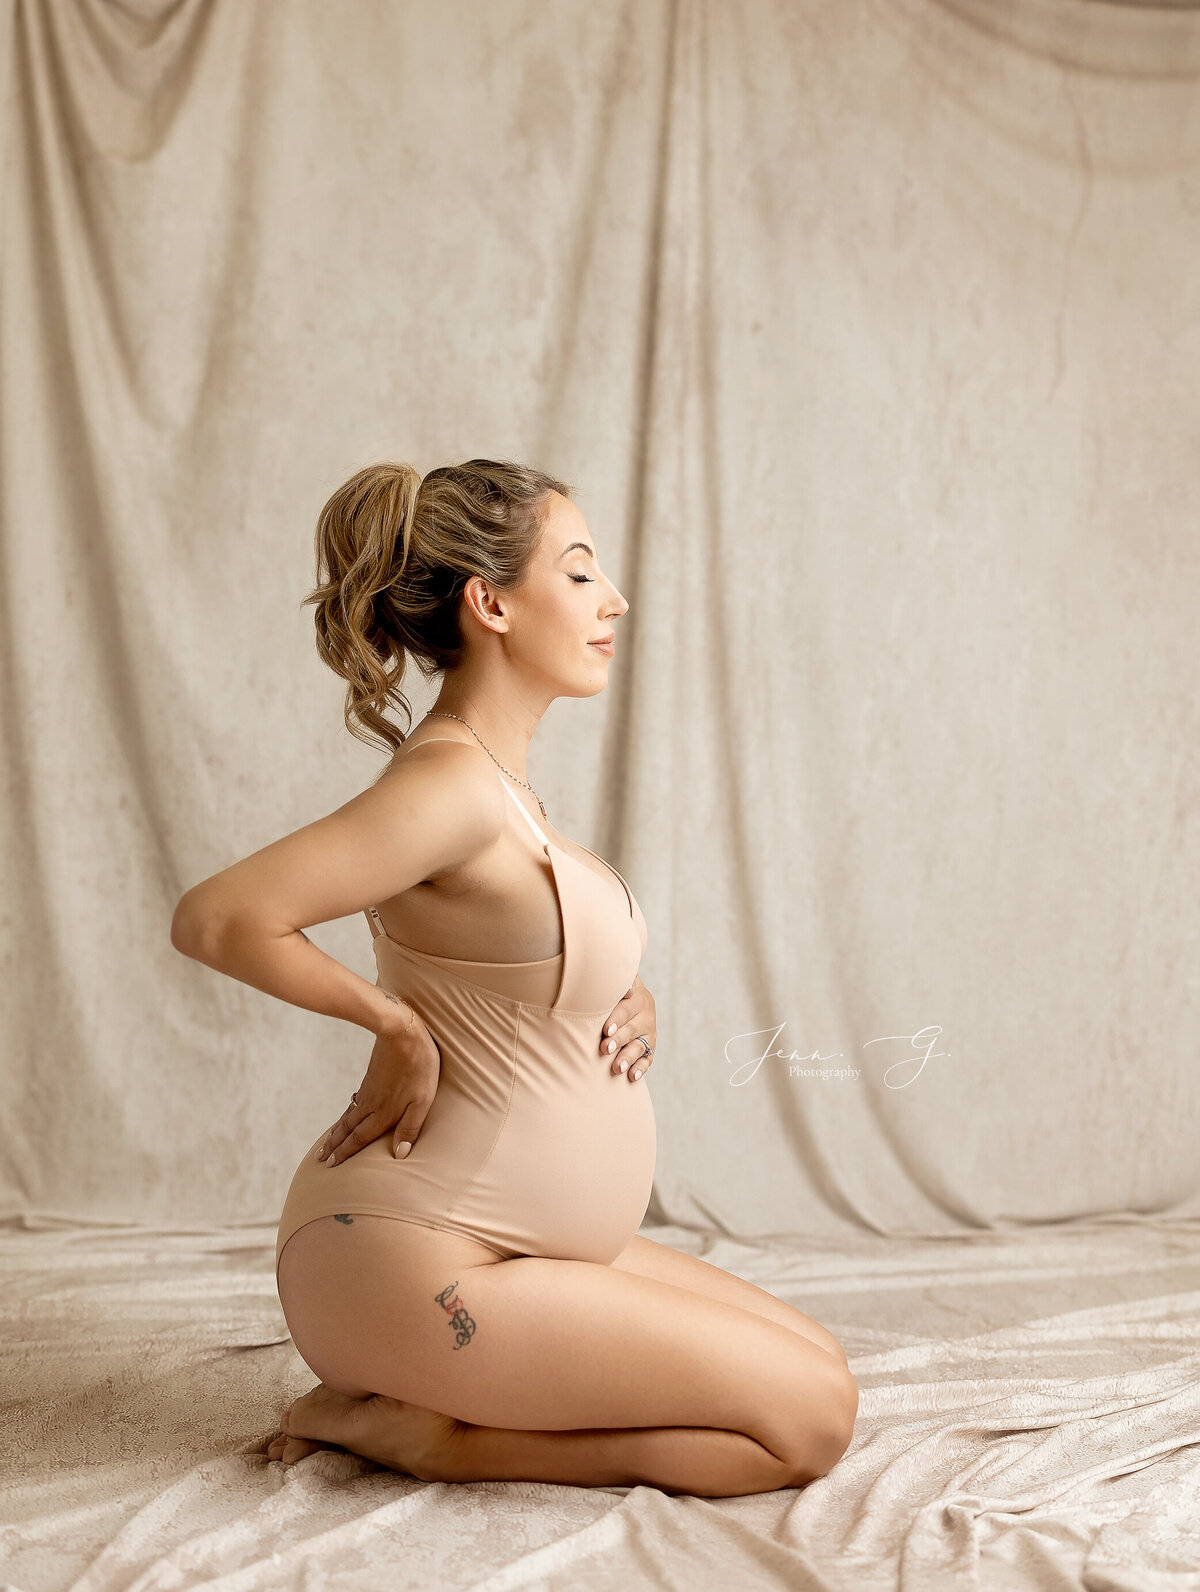 Vancouver  Photographer  photographs a women posing in a body suit during a photoshoot